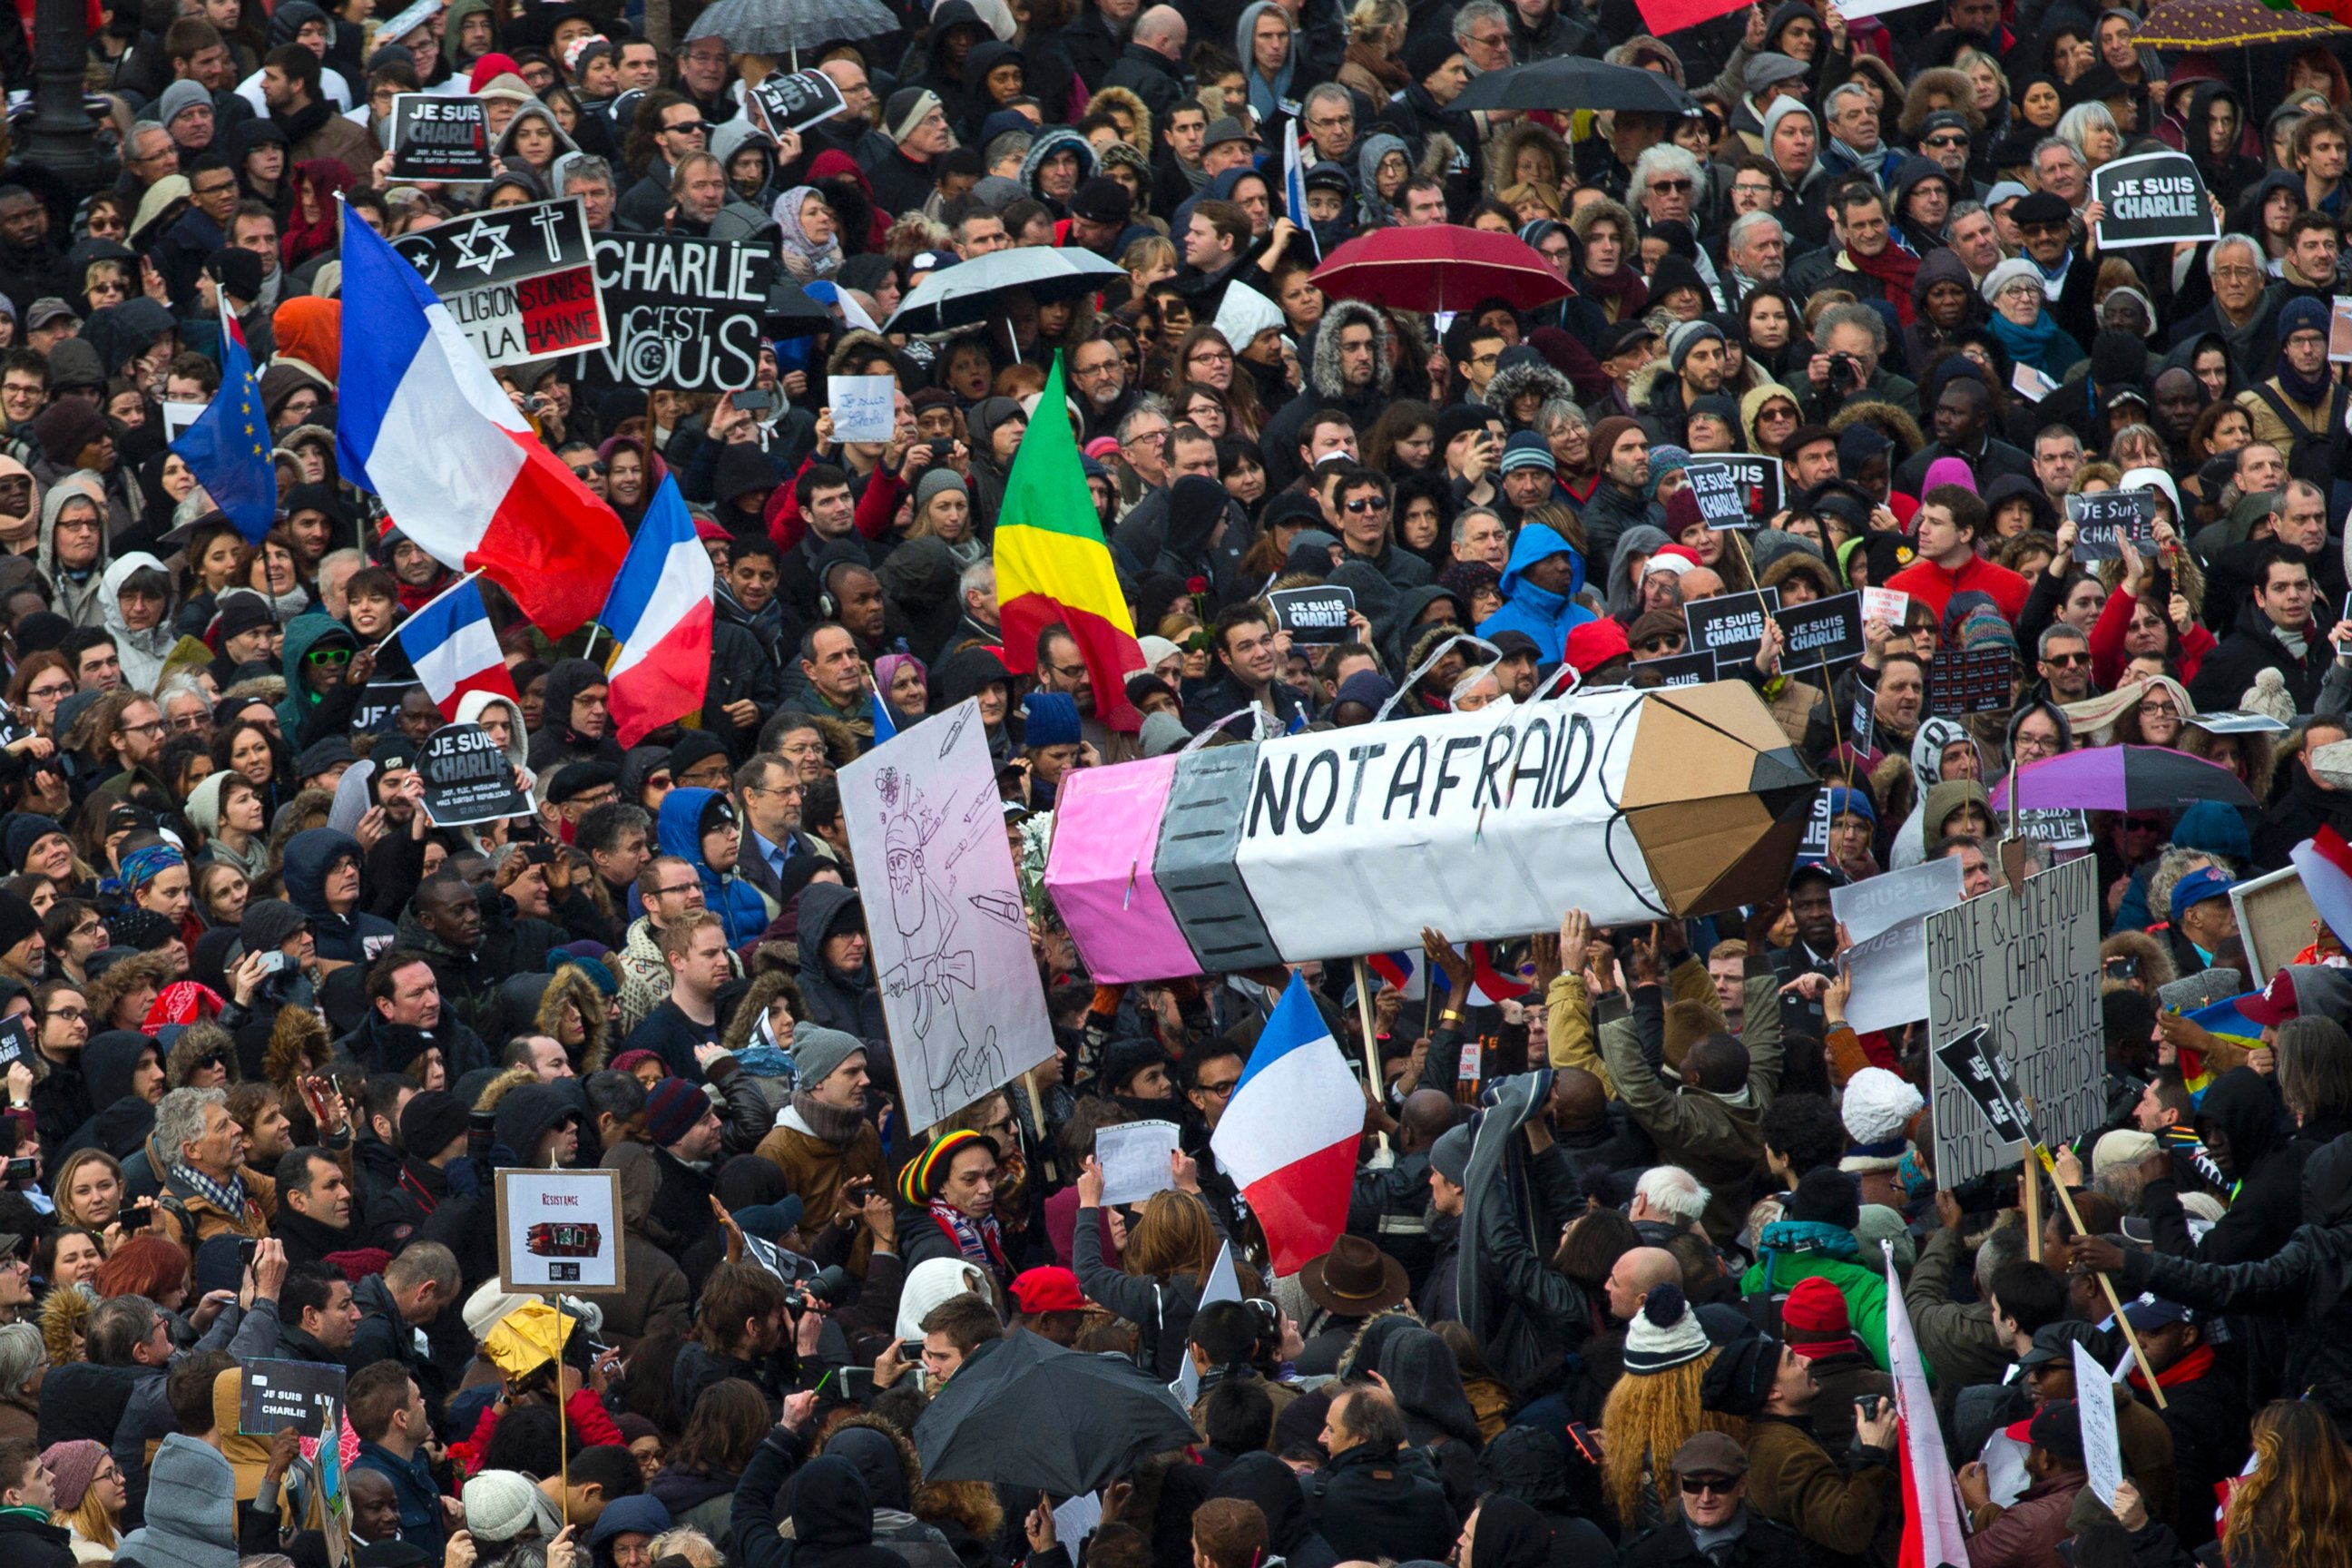 PHOTO: The crowd gather at Republique square in Paris, France, Sunday, Jan. 11, 2015. 